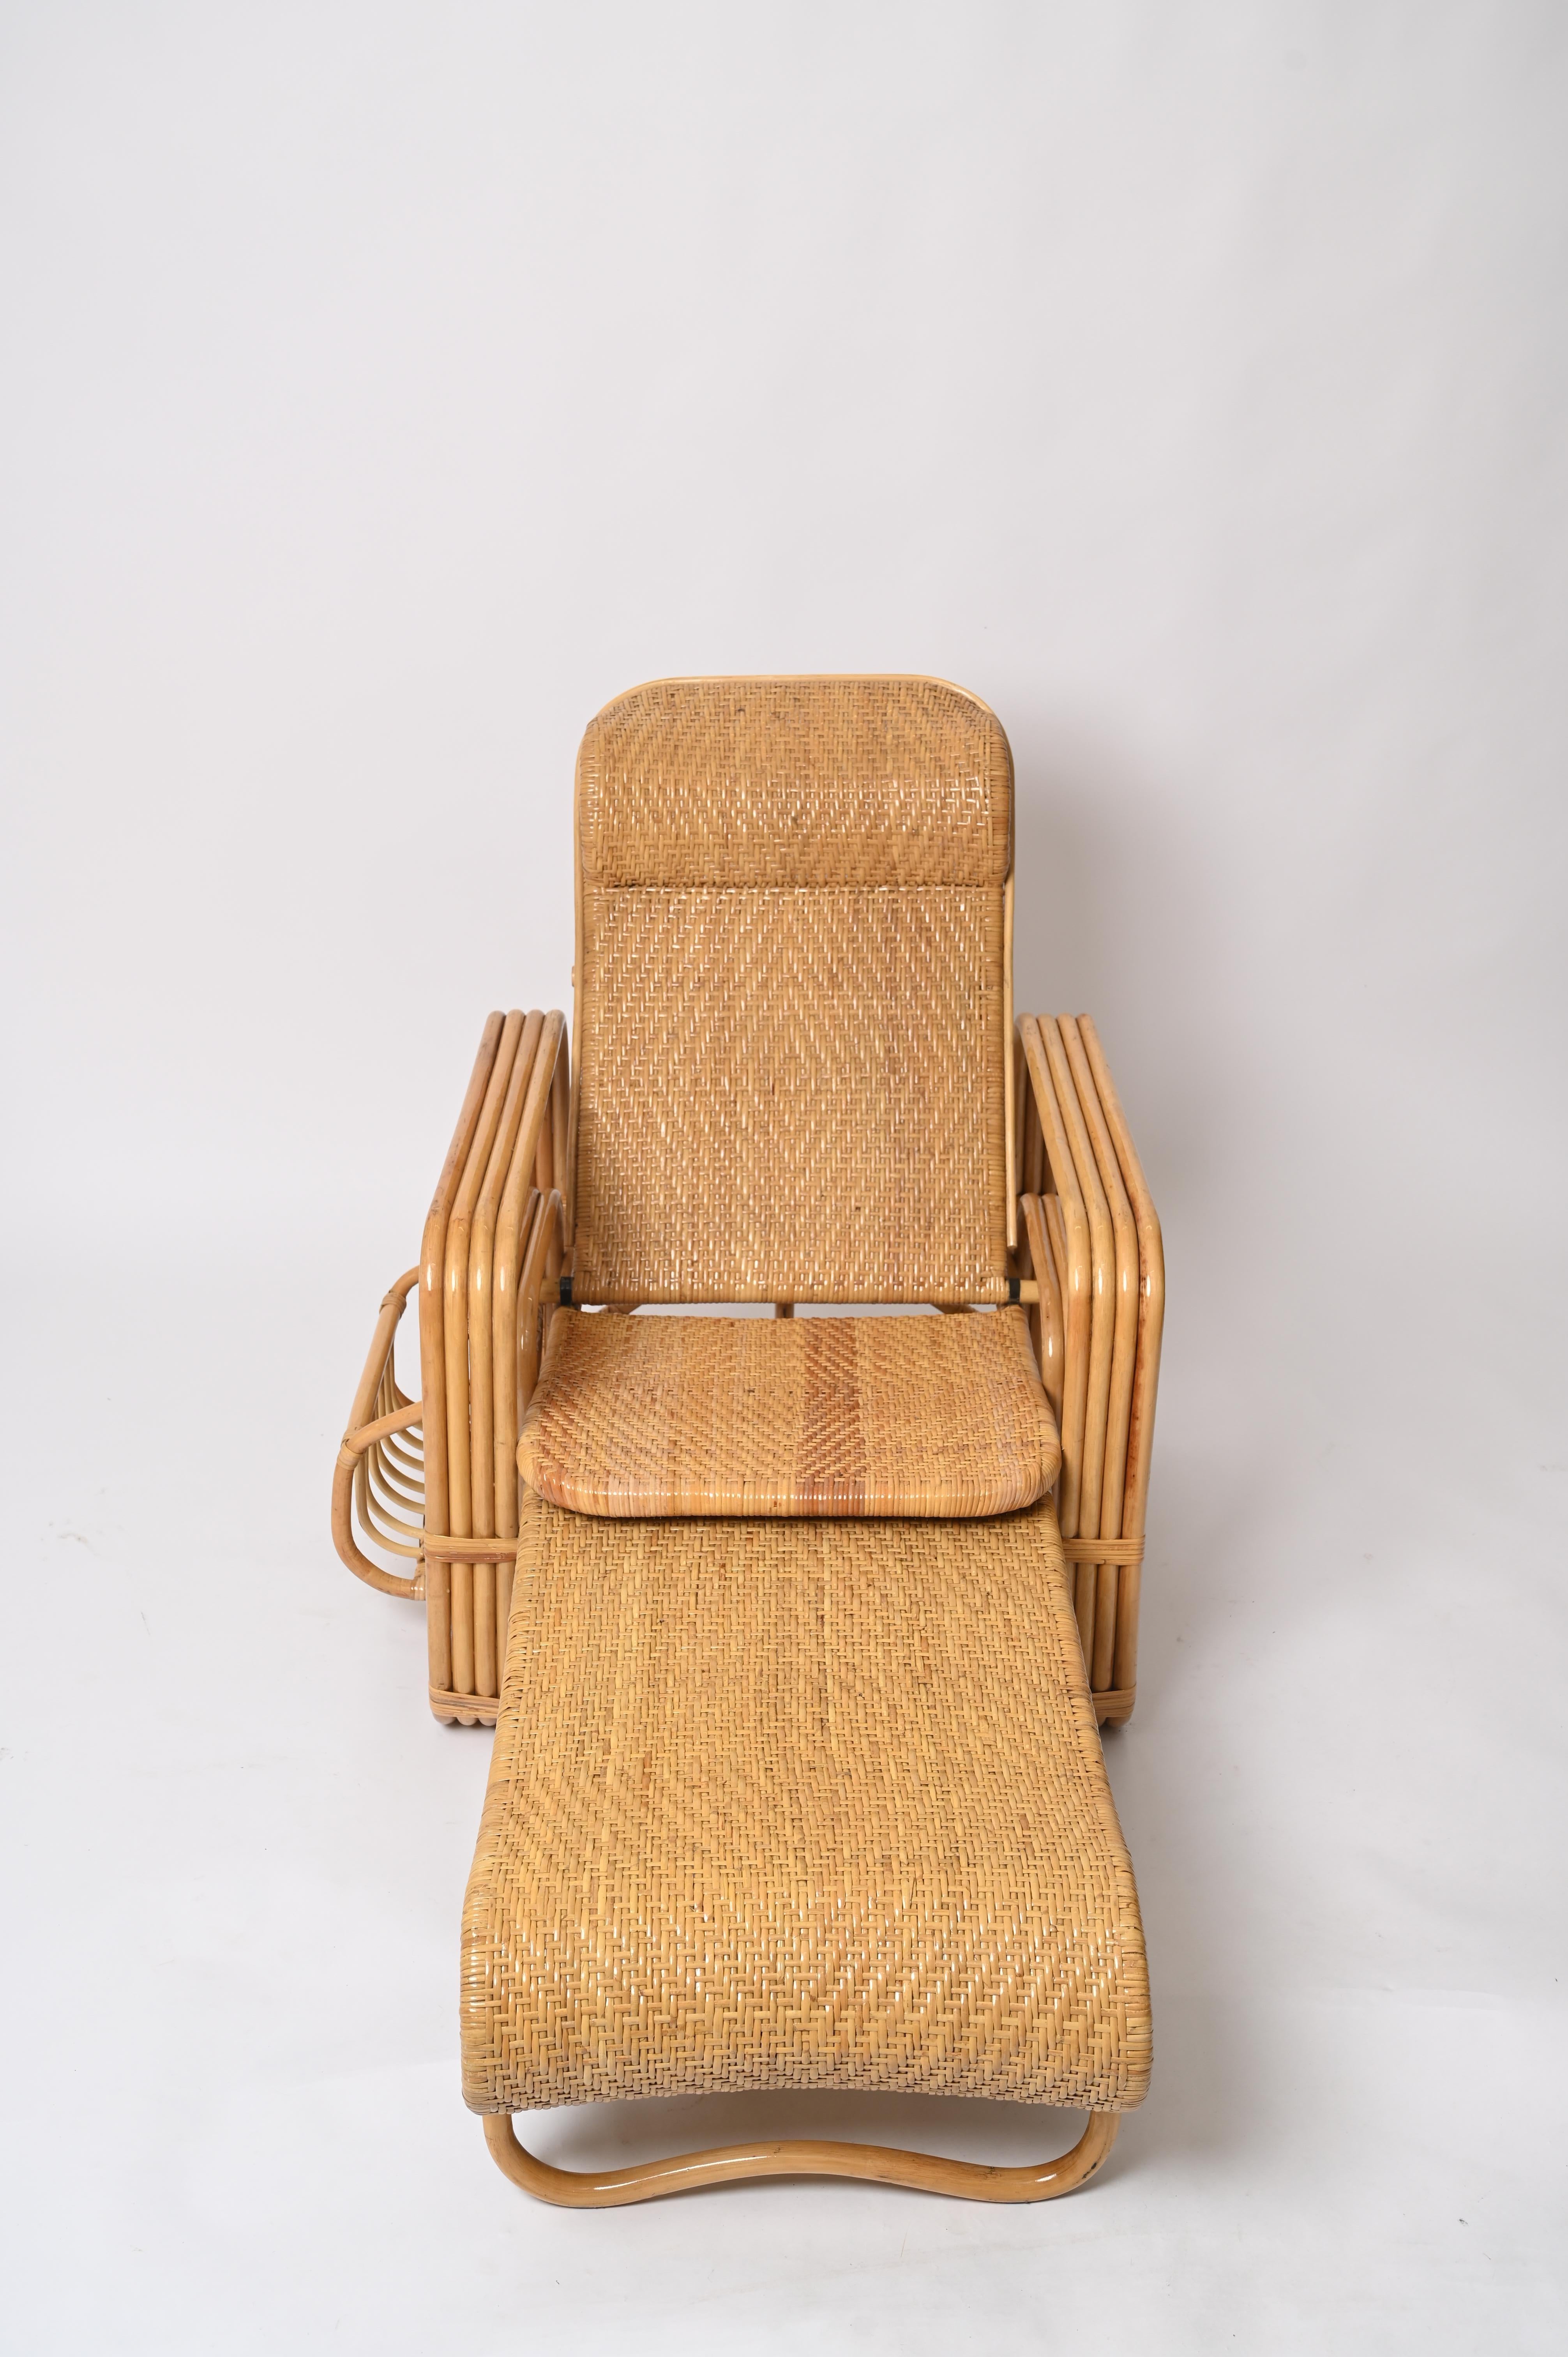 Pair of Adjustable Chaise Longue / Lounge Chairs, Wicker and Rattan, Italy '70s  For Sale 12